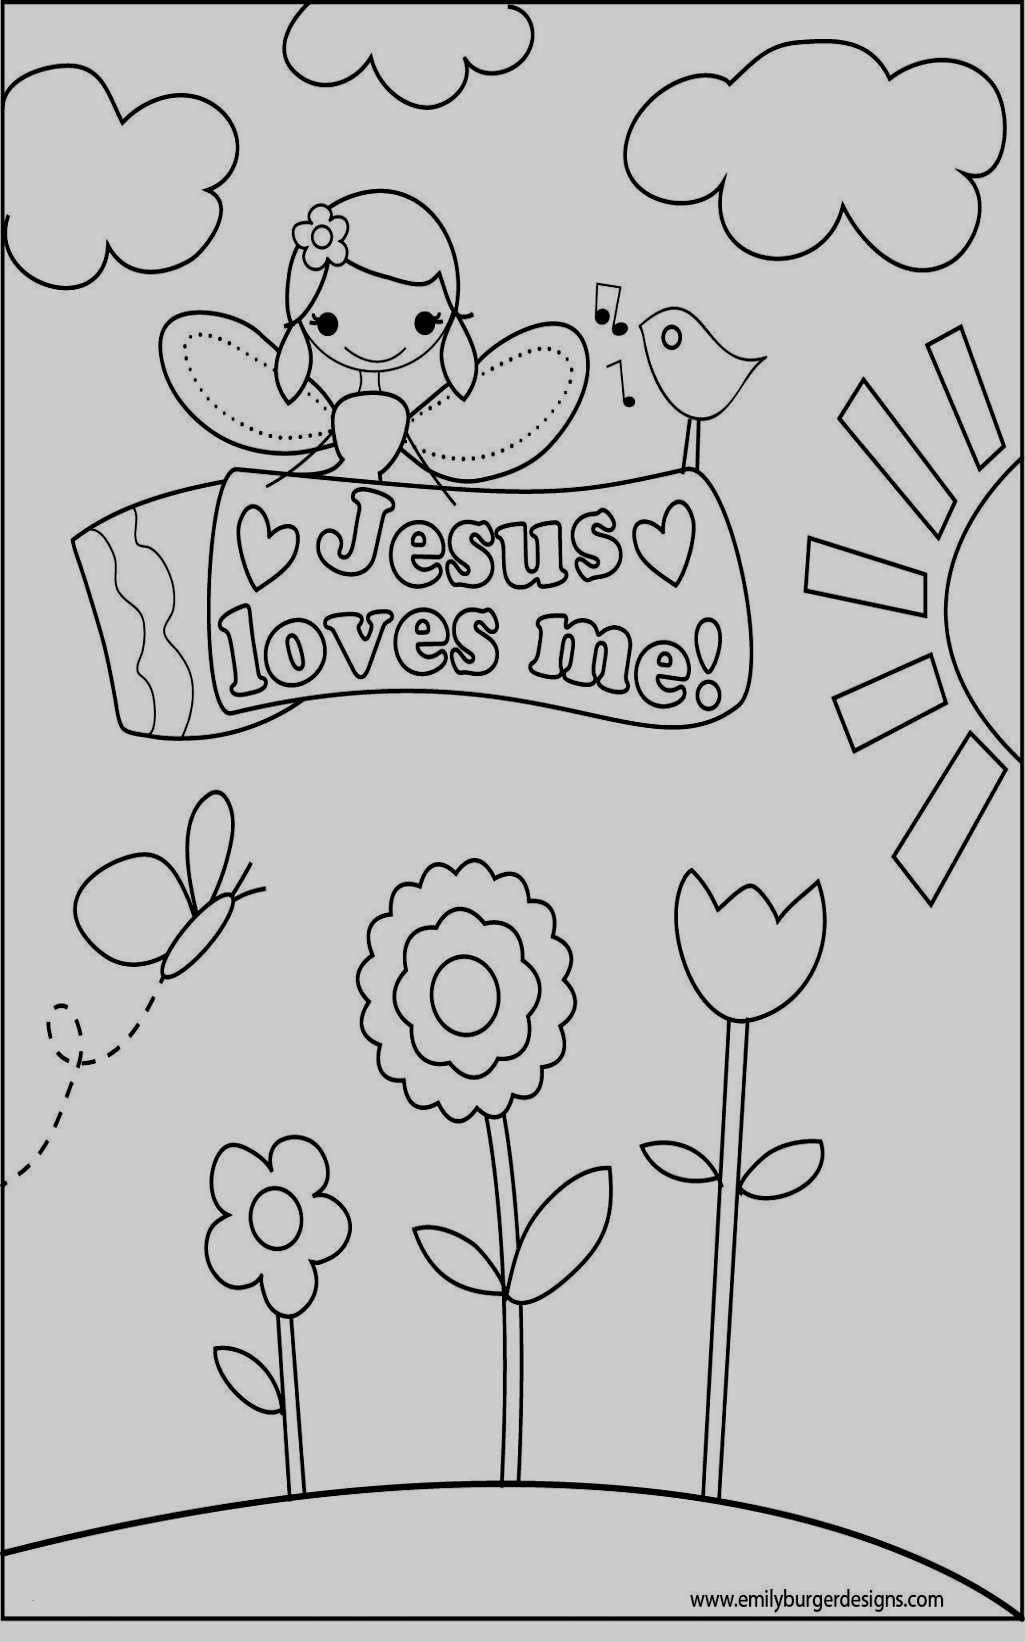 Coloring Pages Sheep And The Shepherd The Lost Sheep Coloring Page Shepherd And Sheep Coloring Page Jesus